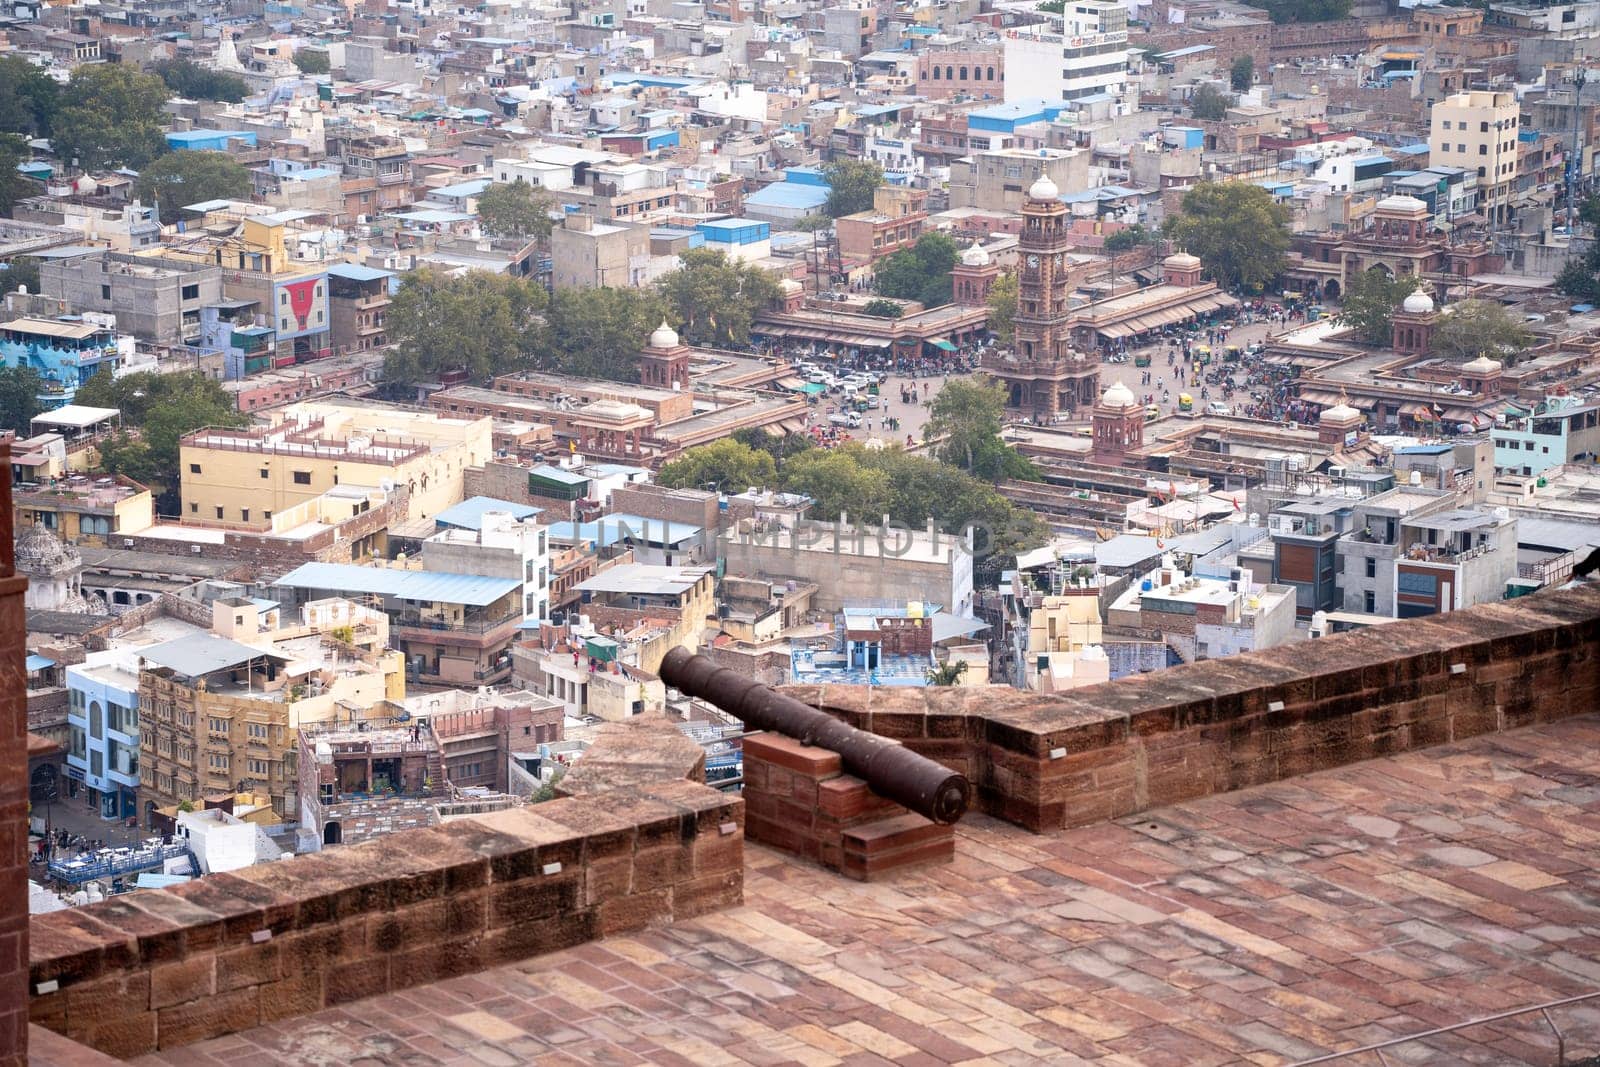 Ancient iron cannon set on the walls of a fort looking out over the city of jodhpur, jaipur, udaipur showing the defences of the ancient Rajput kings